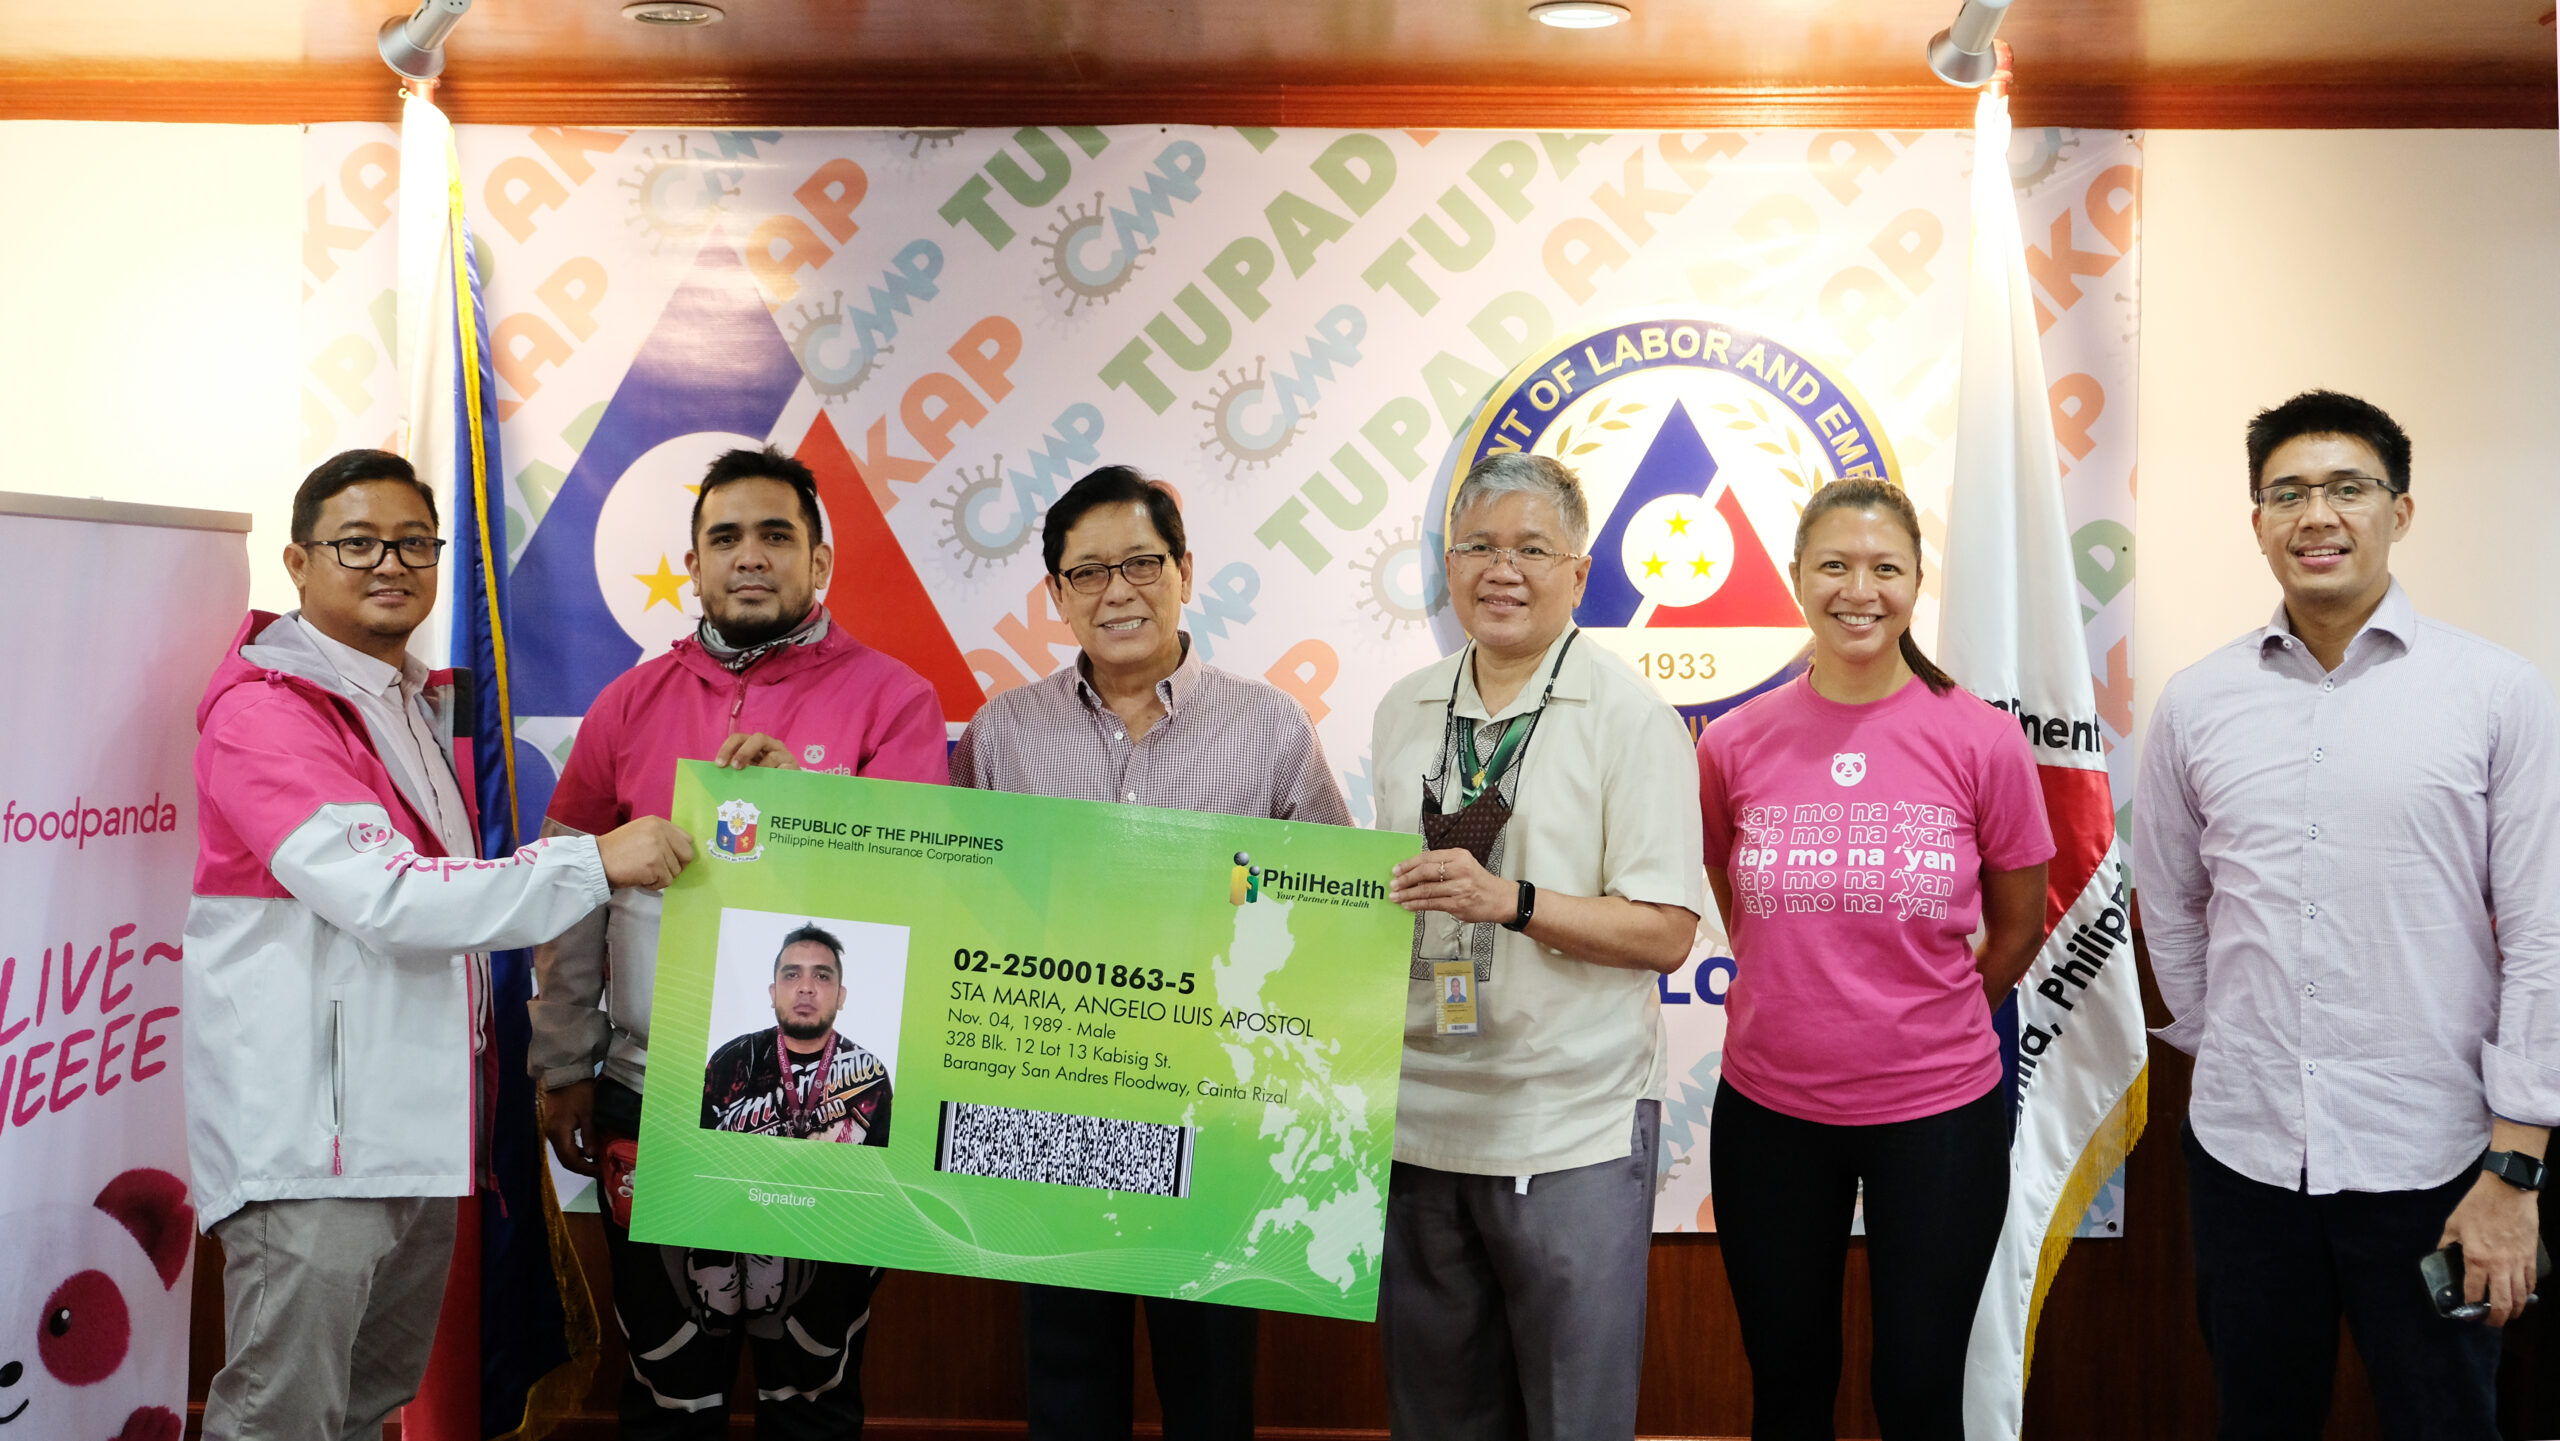 Image - foodpanda, PhilHealth launch partnership for delivery partners’ access to gov’t health benefits